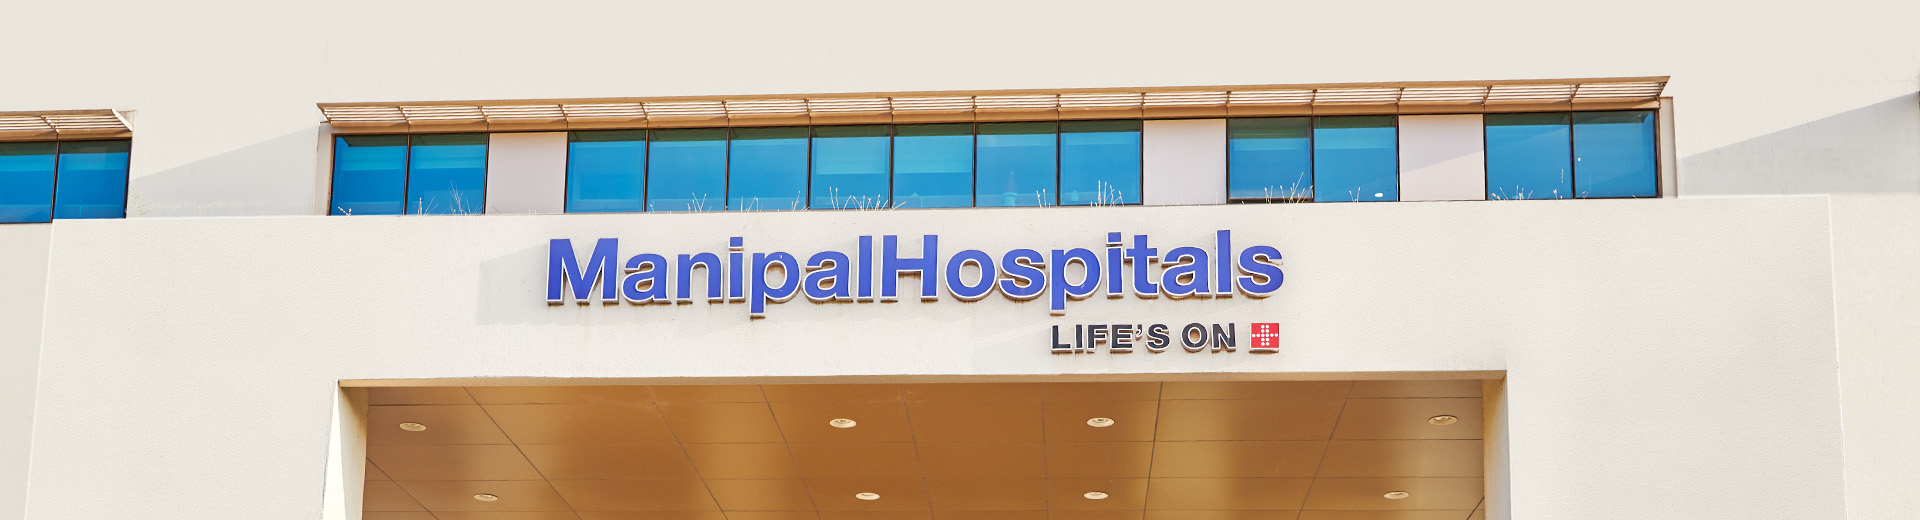 Privacy Policy | Manipal Hospitals Hebbal, Bangalore